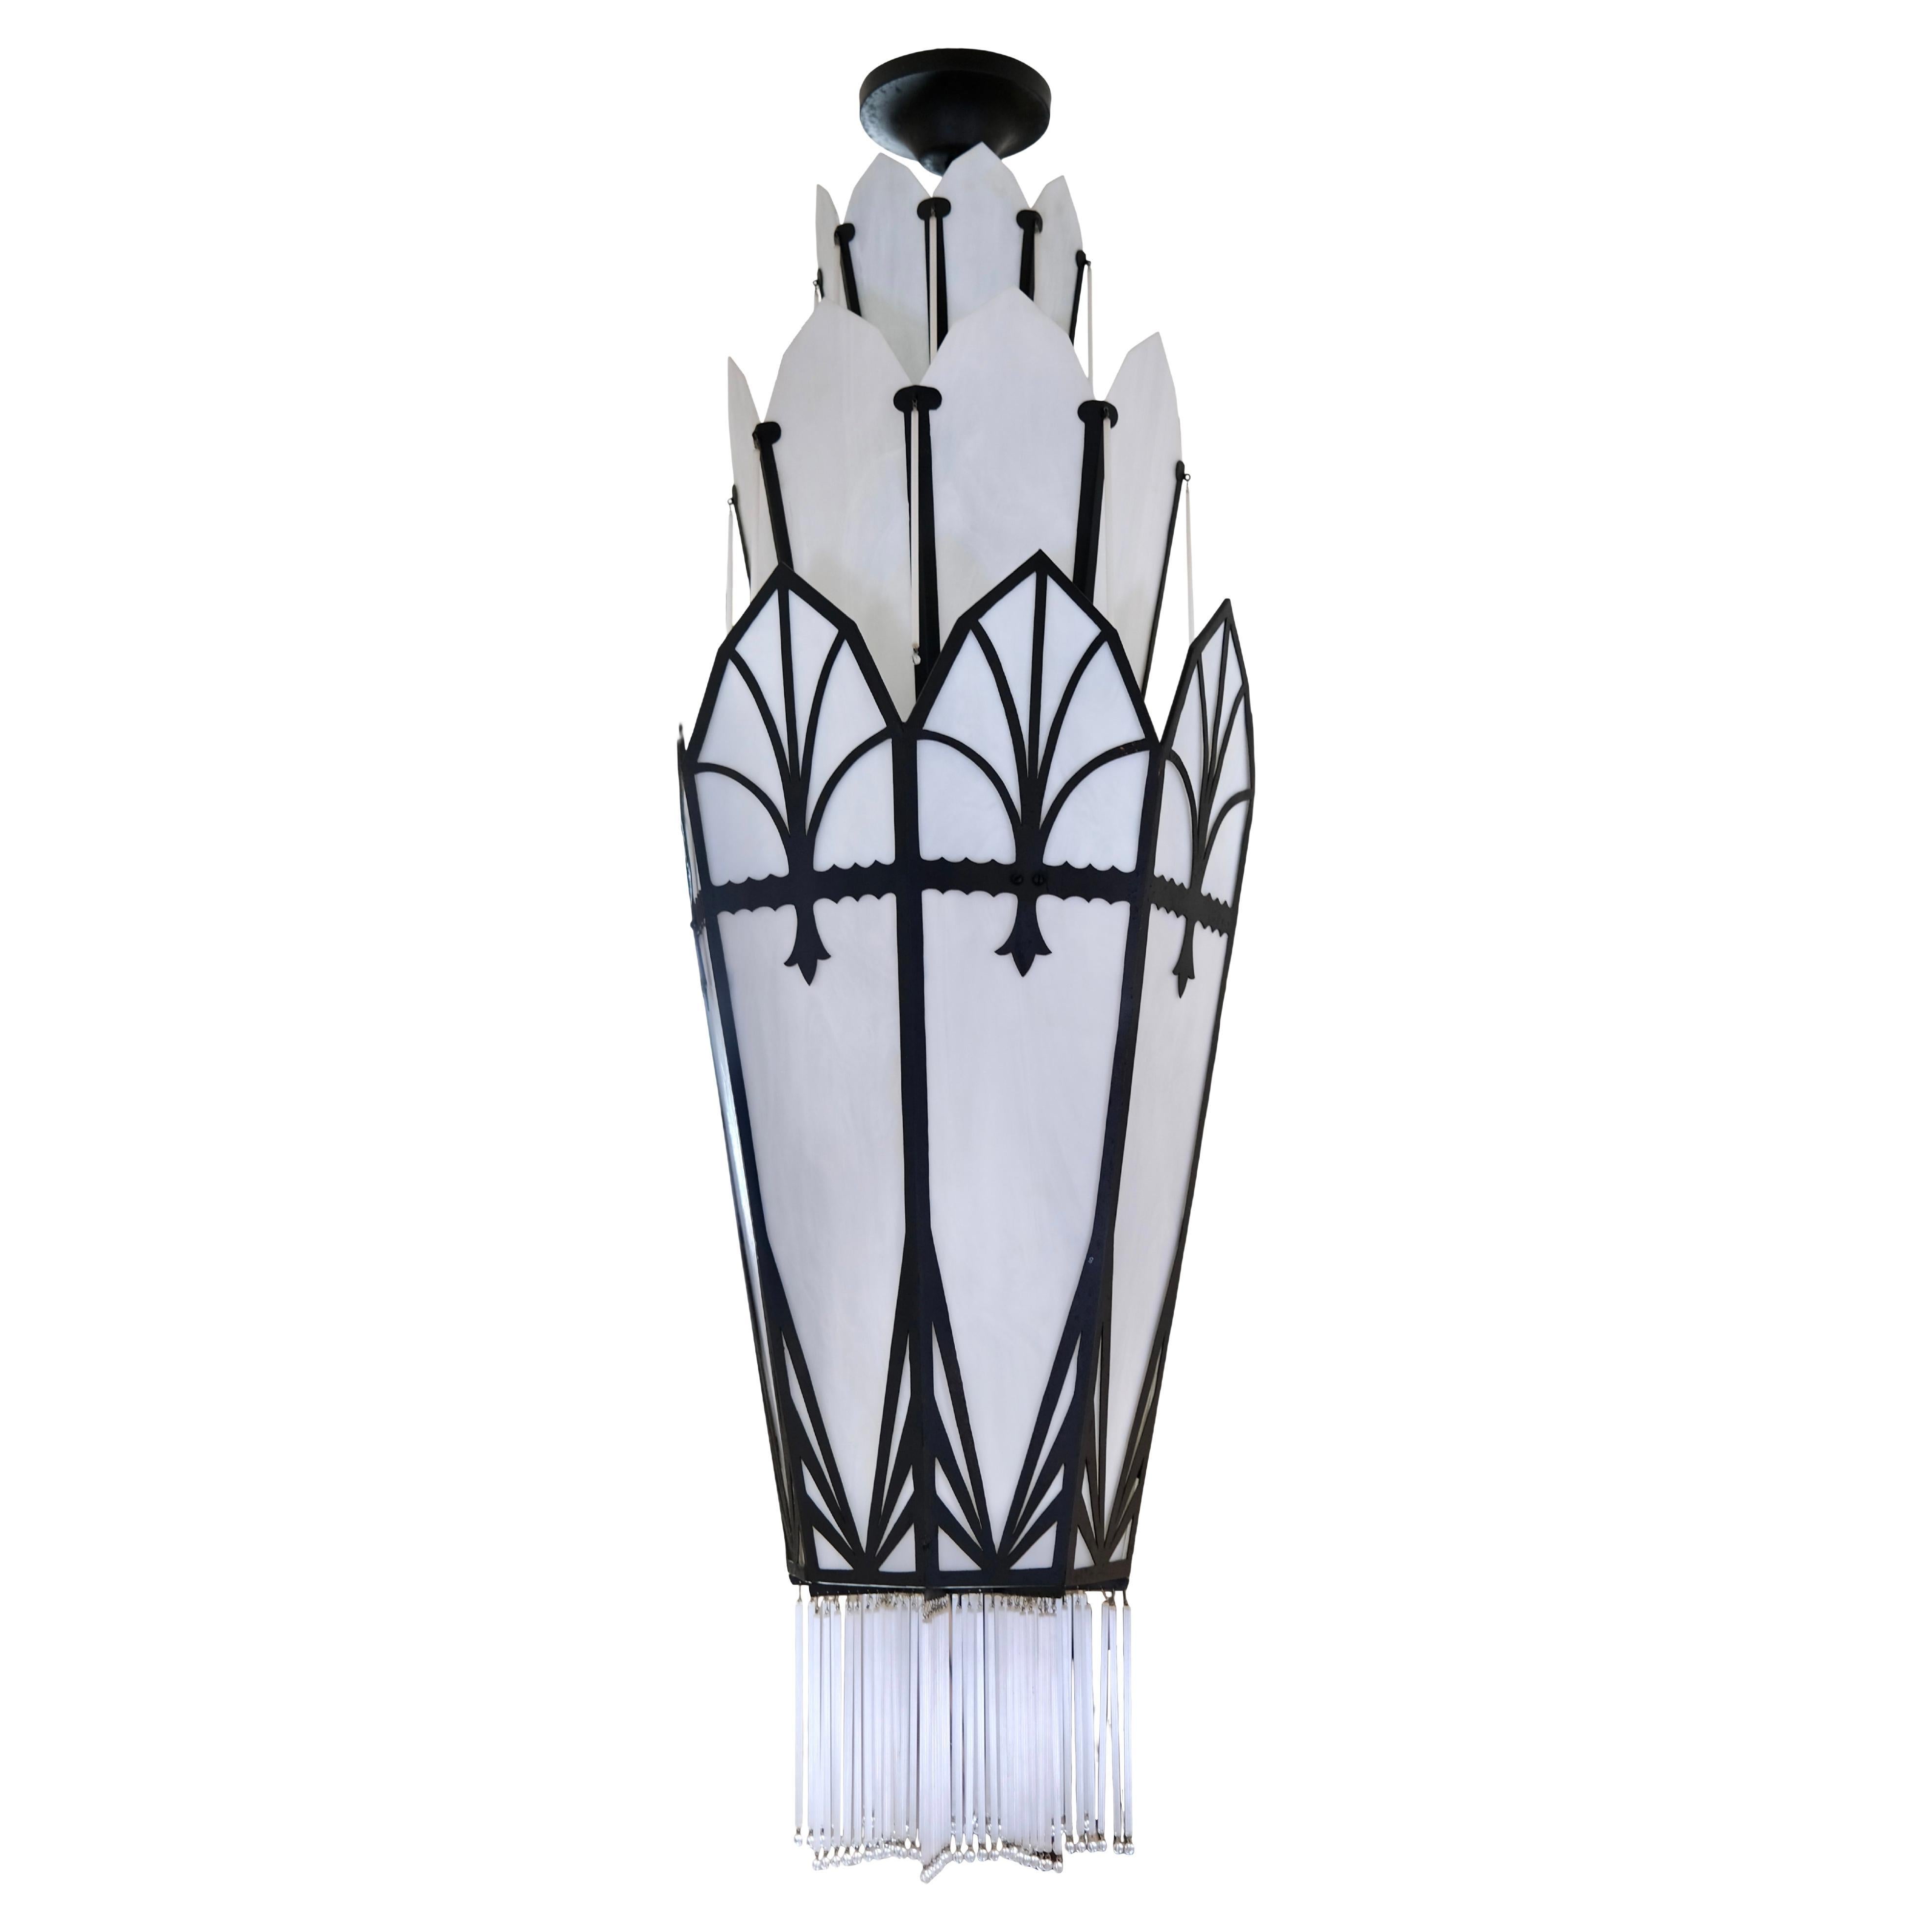 Long Octagonal Art Deco Style Chandelier with Glass and Black Metal Mount For Sale